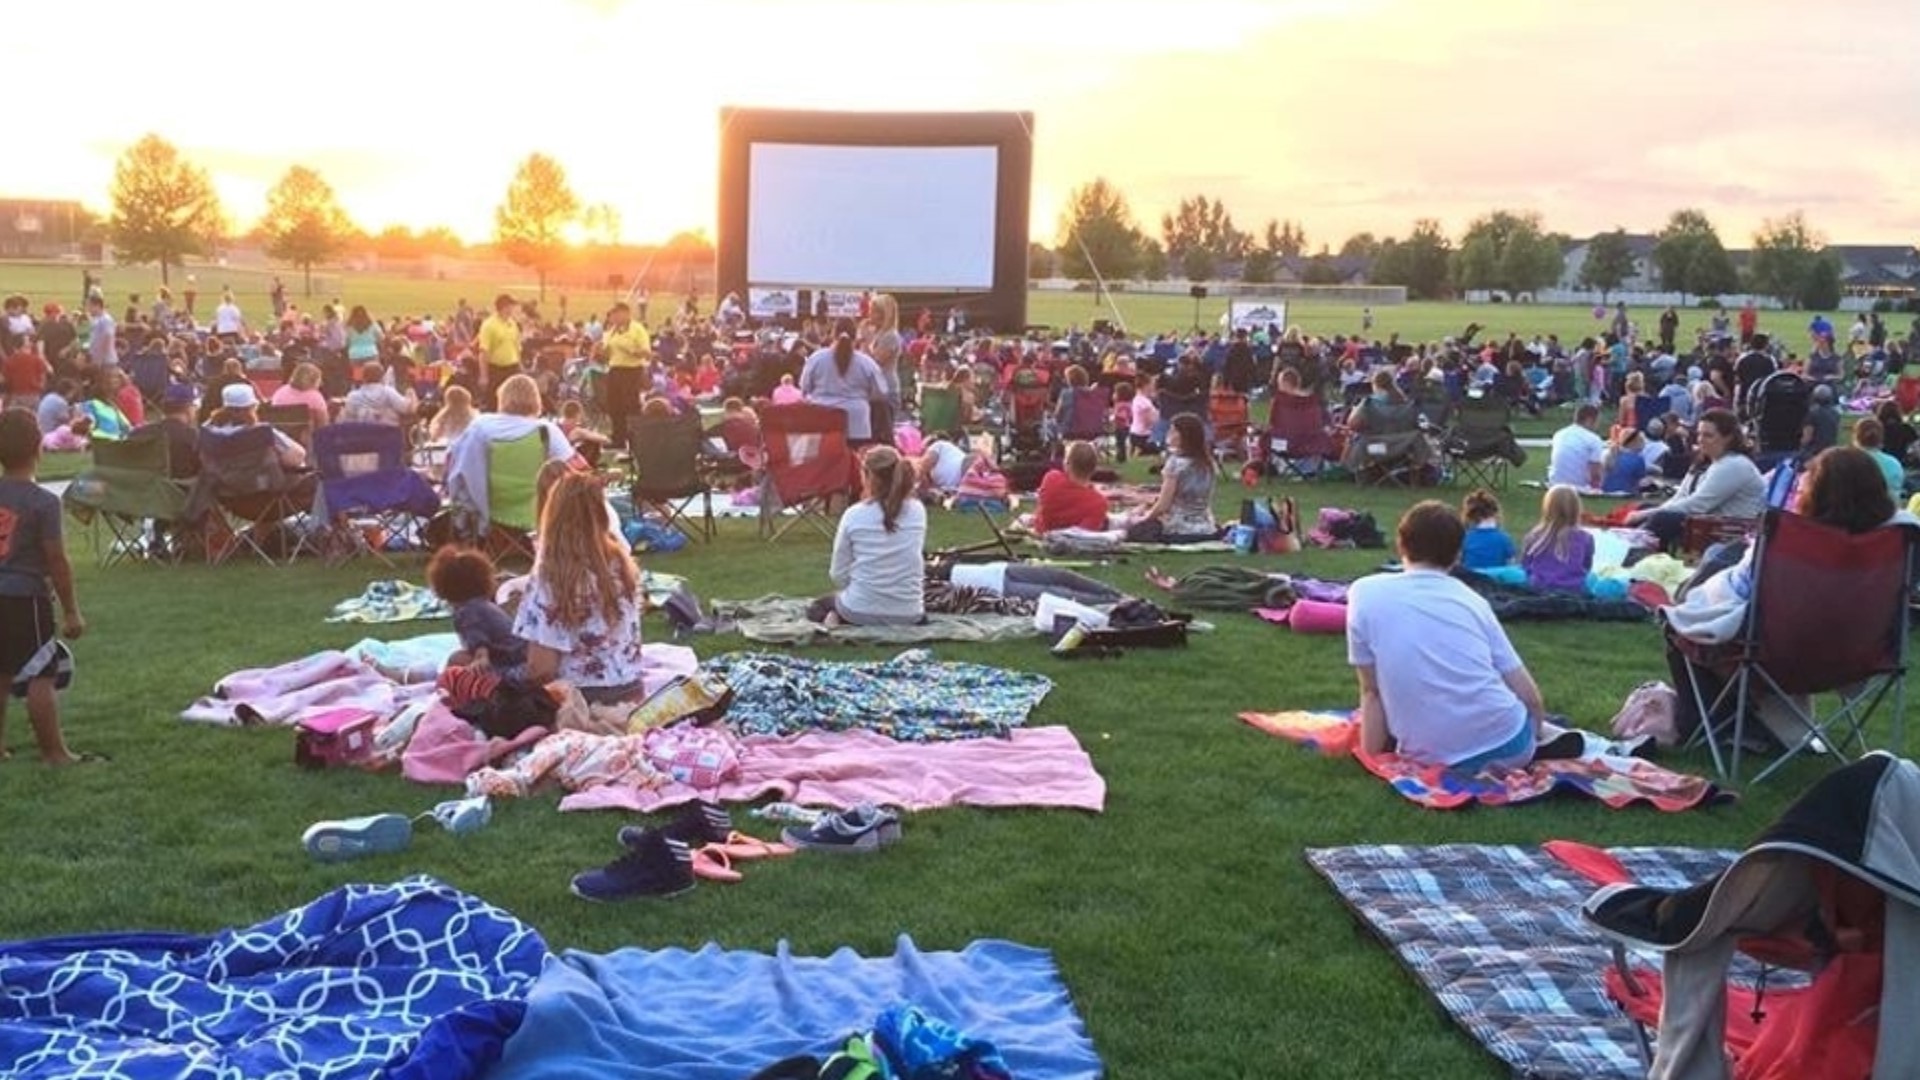 Every Friday evening from June 10 to August 19, the community is invited to bring their blankets and chairs to Settlers Park for 11 free movies on the big screen.